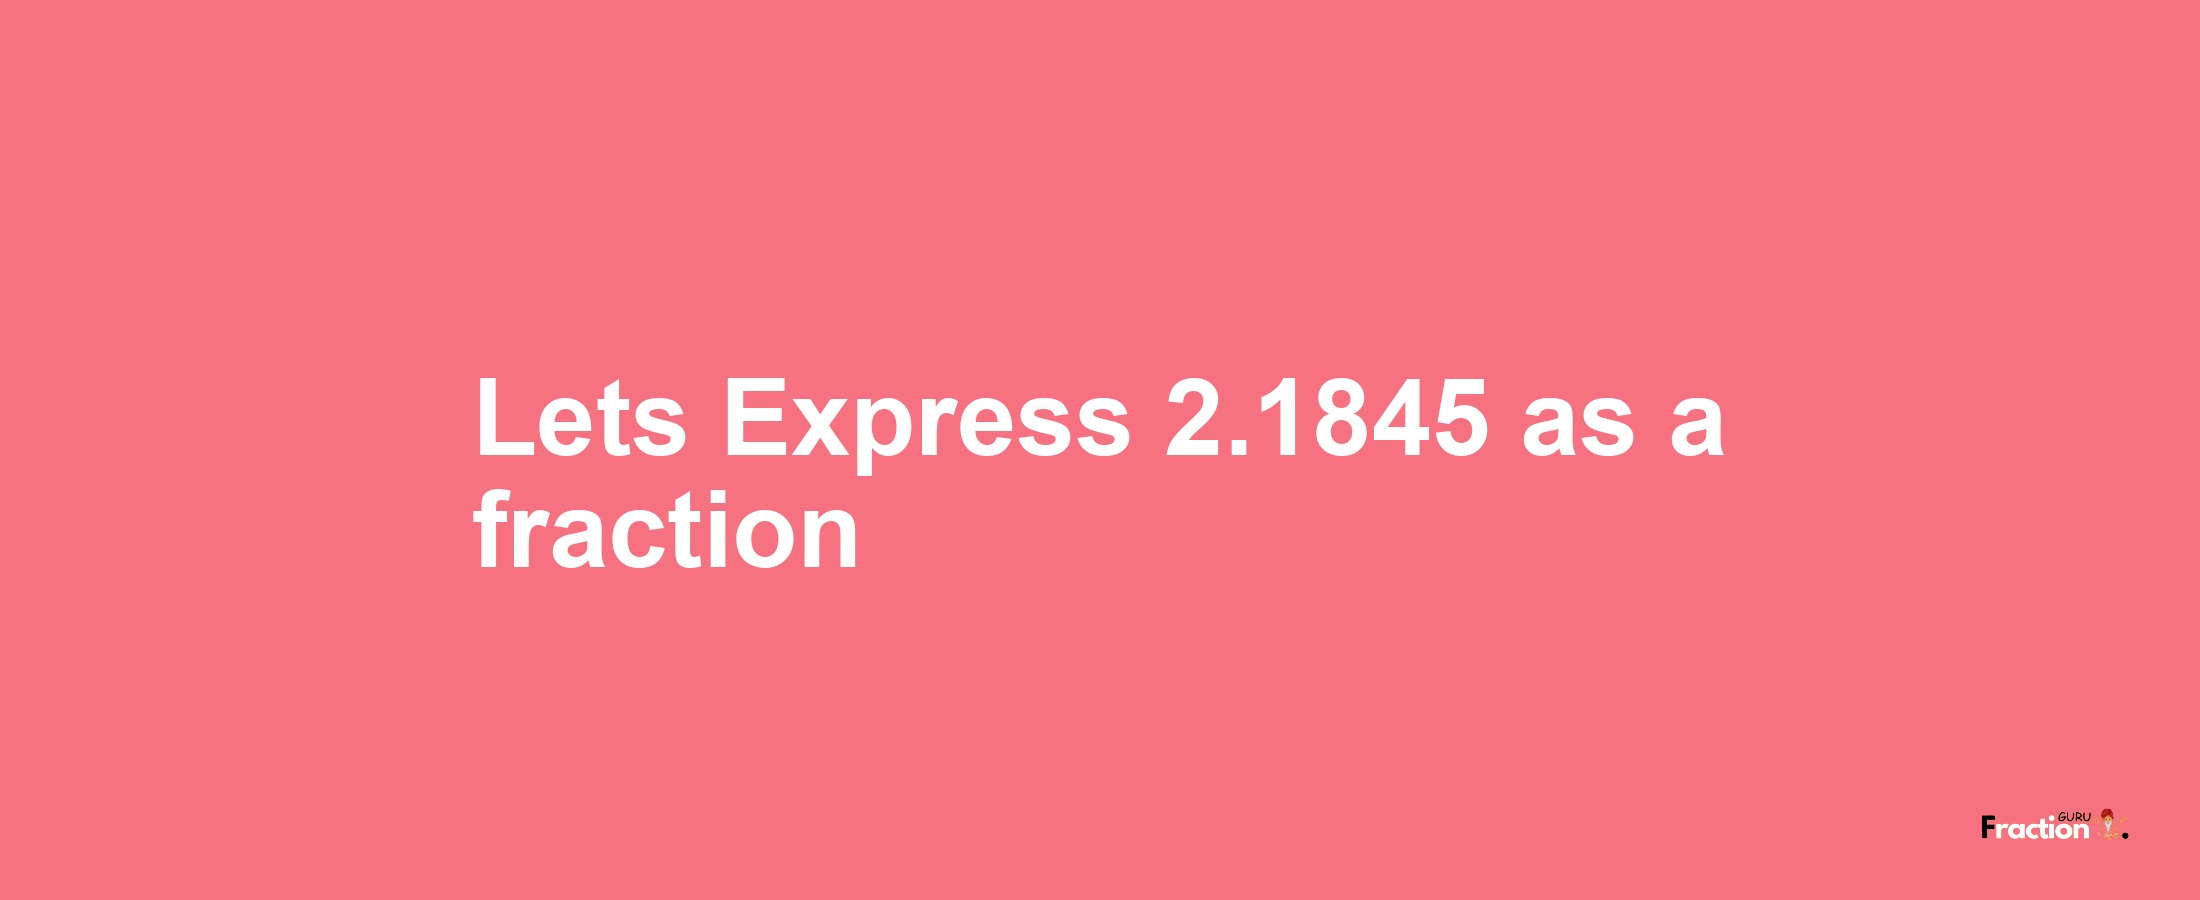 Lets Express 2.1845 as afraction